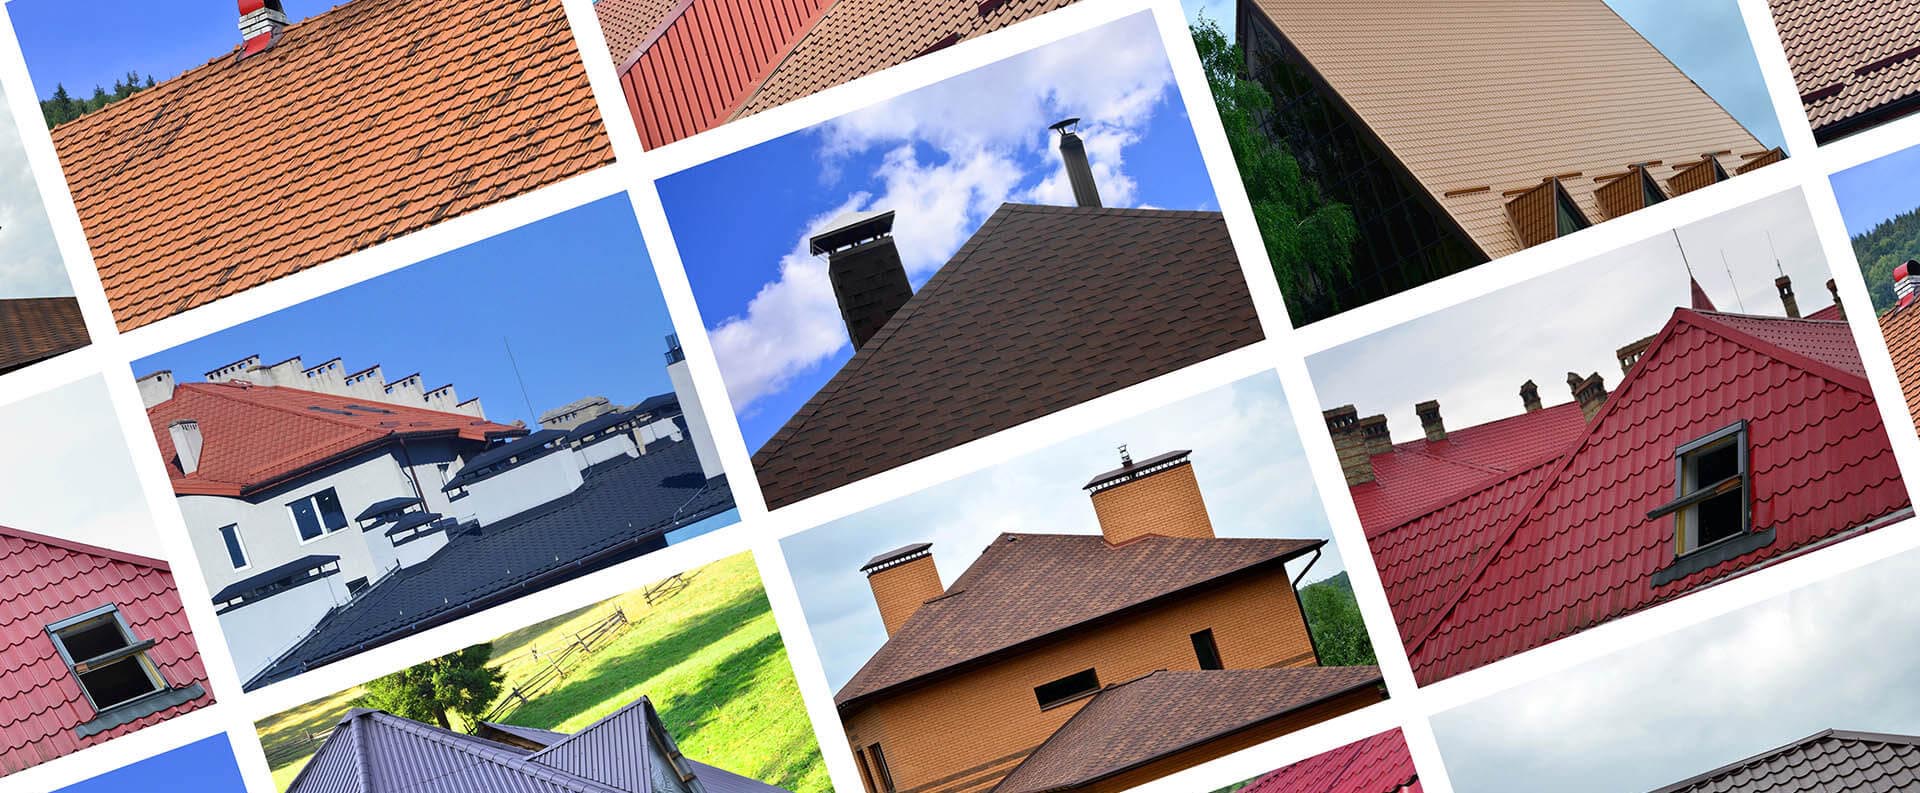 ROOFING SERVICES